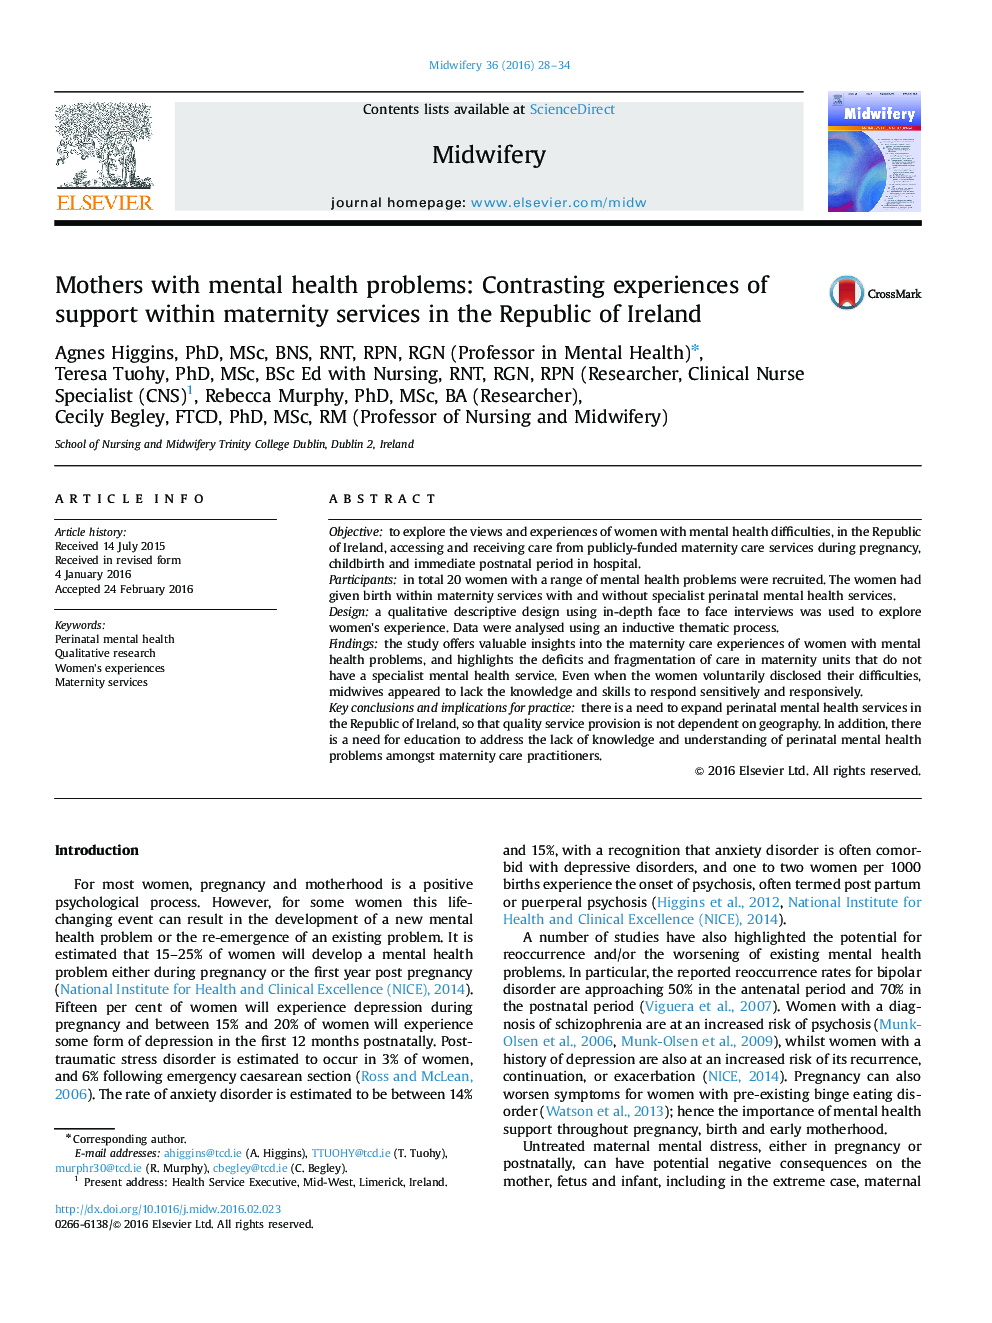 Mothers with mental health problems: Contrasting experiences of support within maternity services in the Republic of Ireland